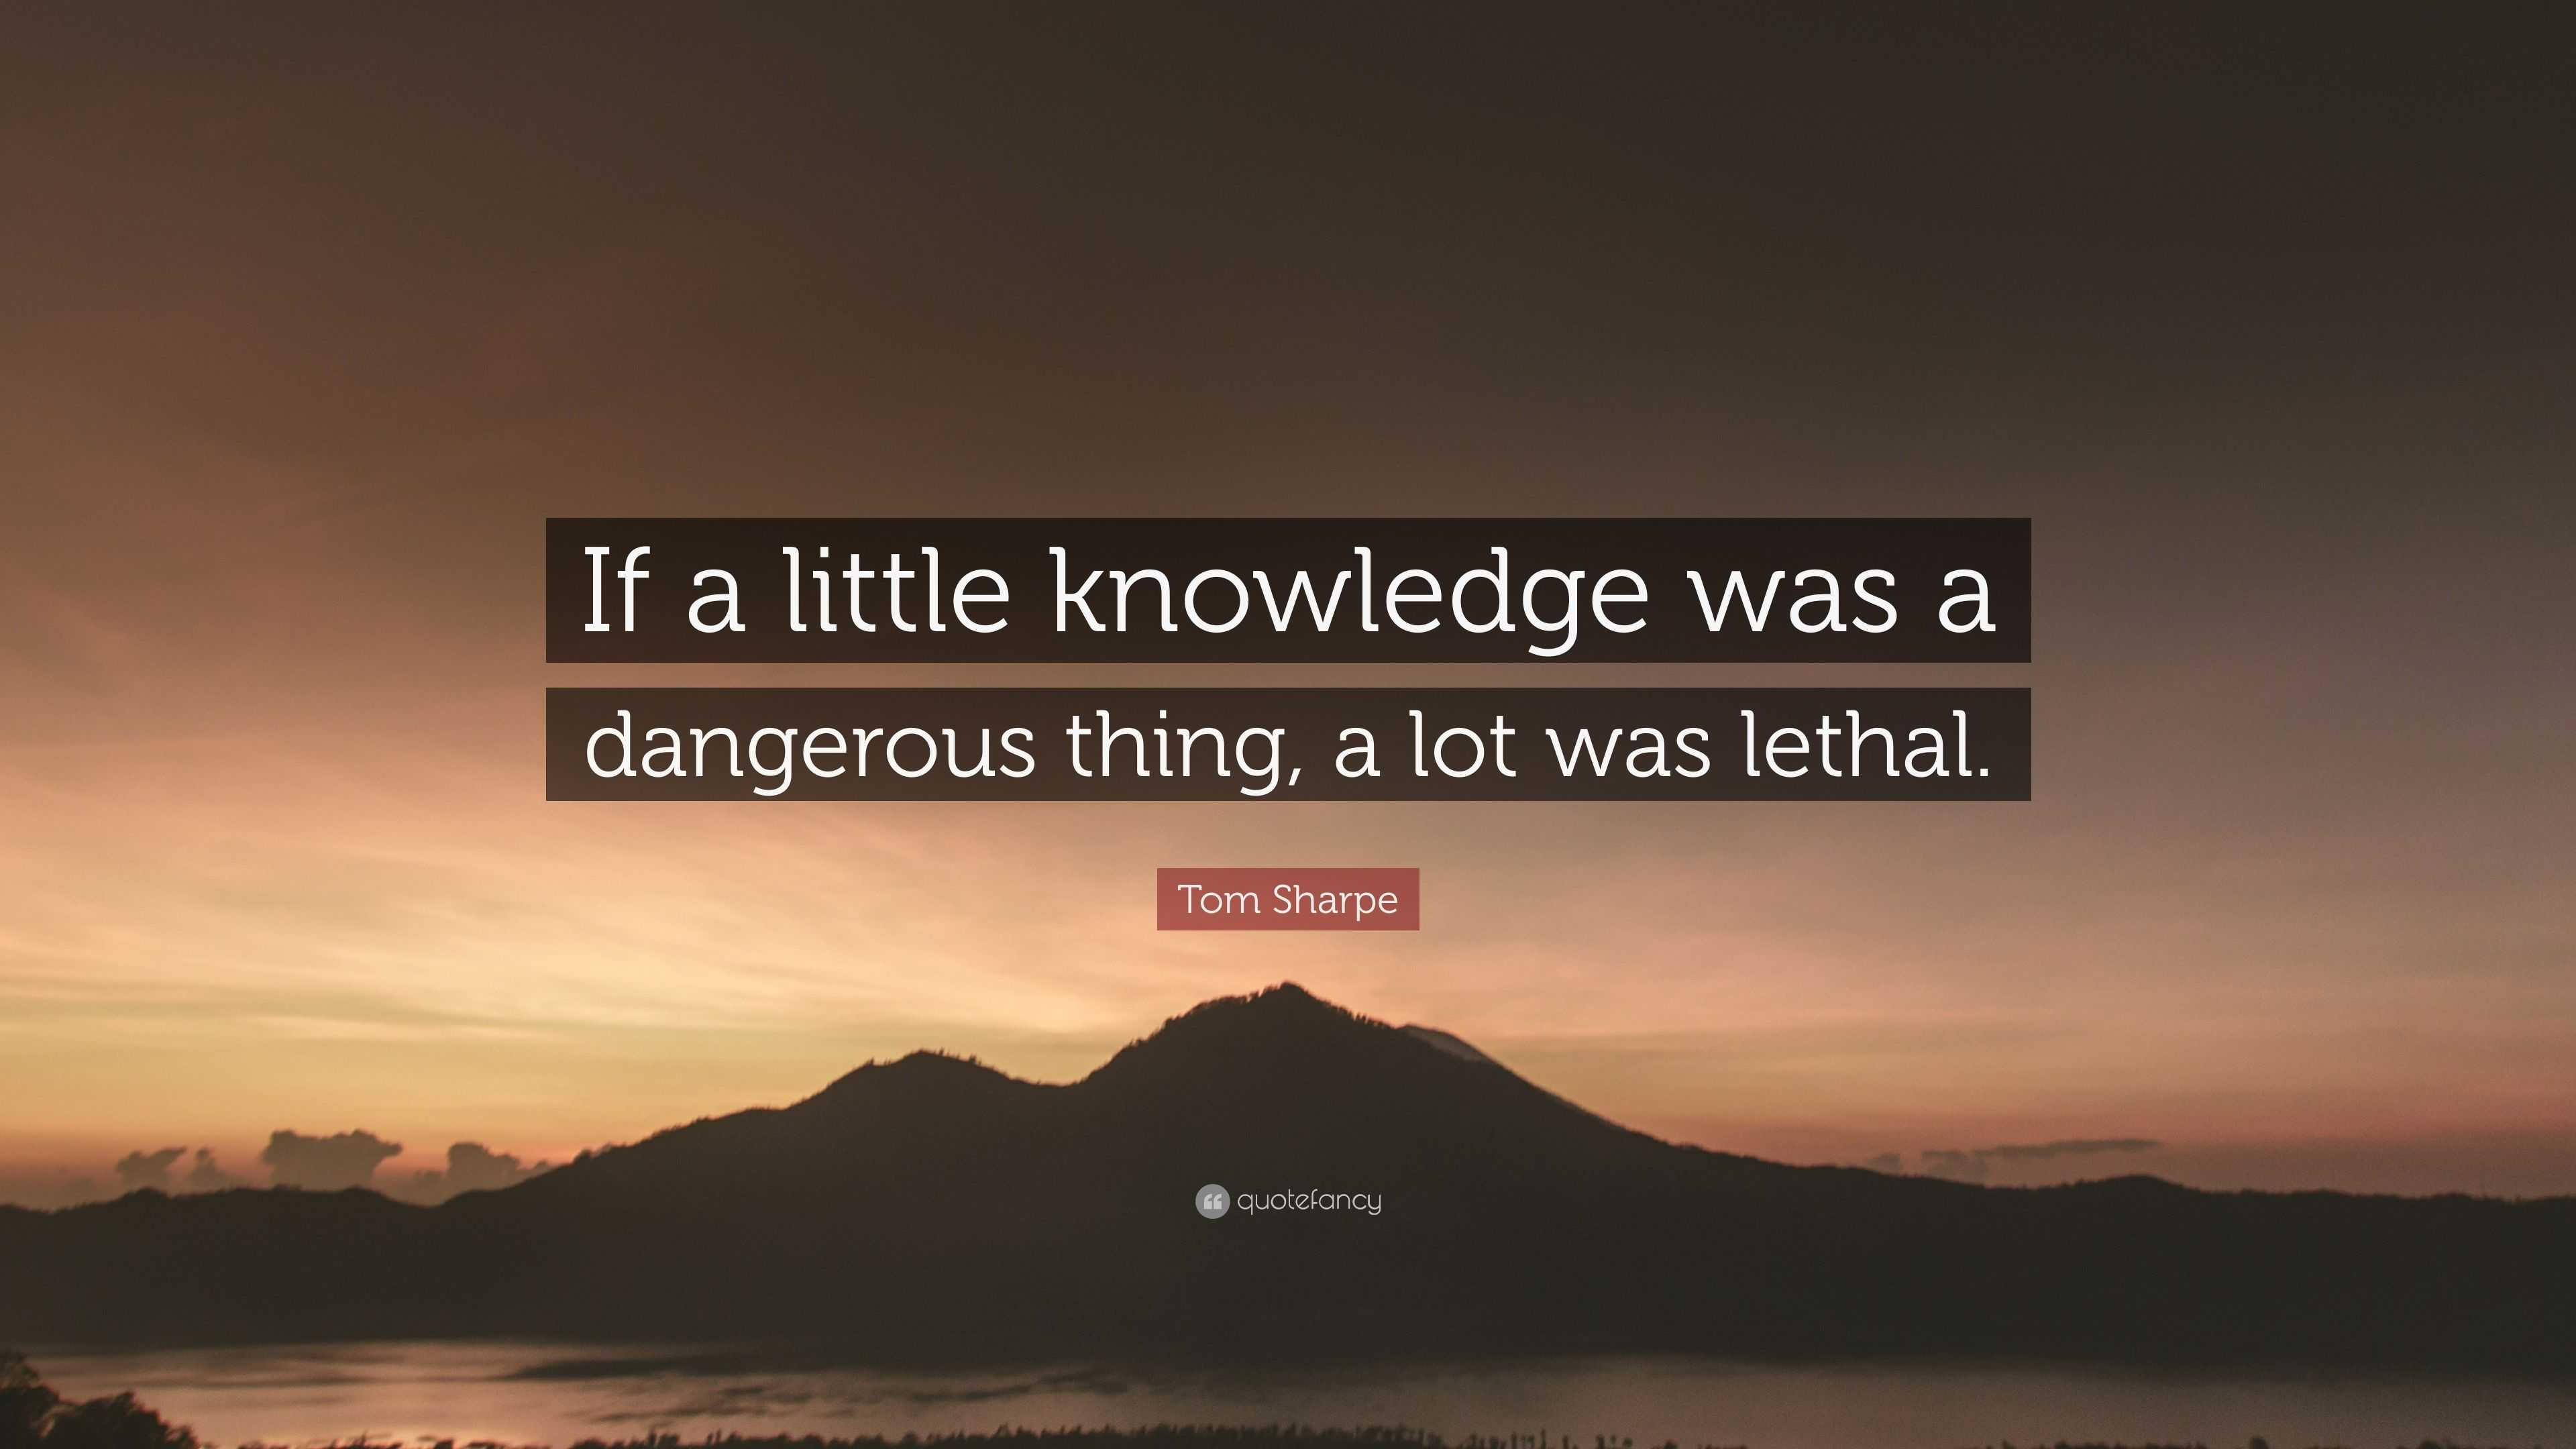 Tom Sharpe Quote: “If a little knowledge was a dangerous thing, a lot ...